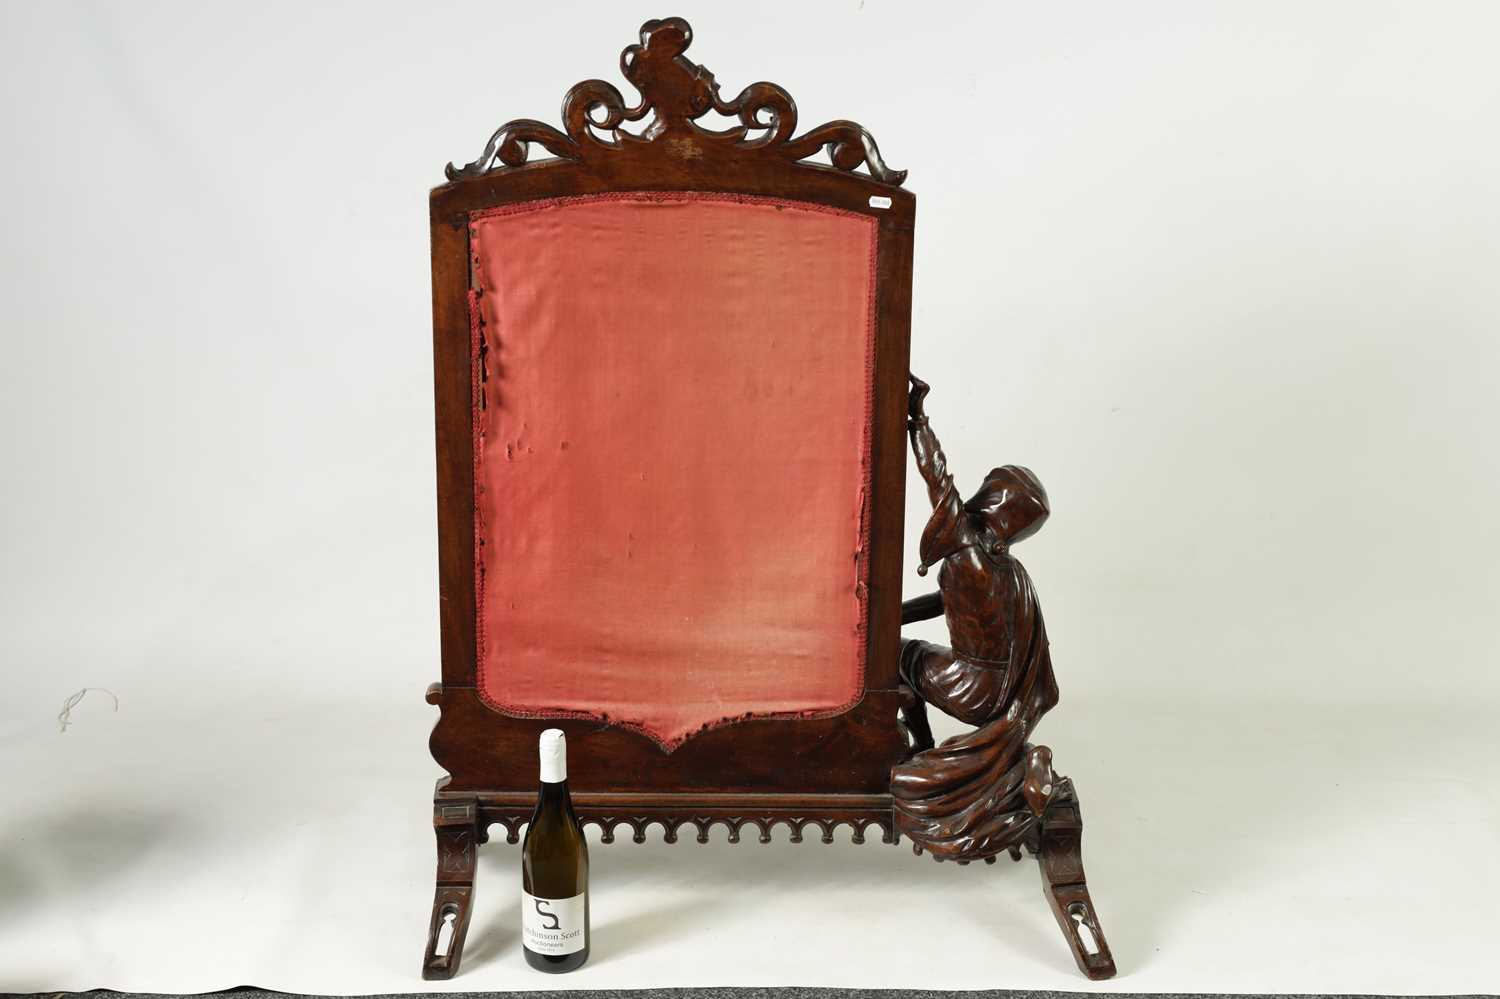 A LATE 19TH-CENTURY CONTINENTAL CARVED WALNUT TAPESTRY FIRE SCREEN - Image 10 of 10